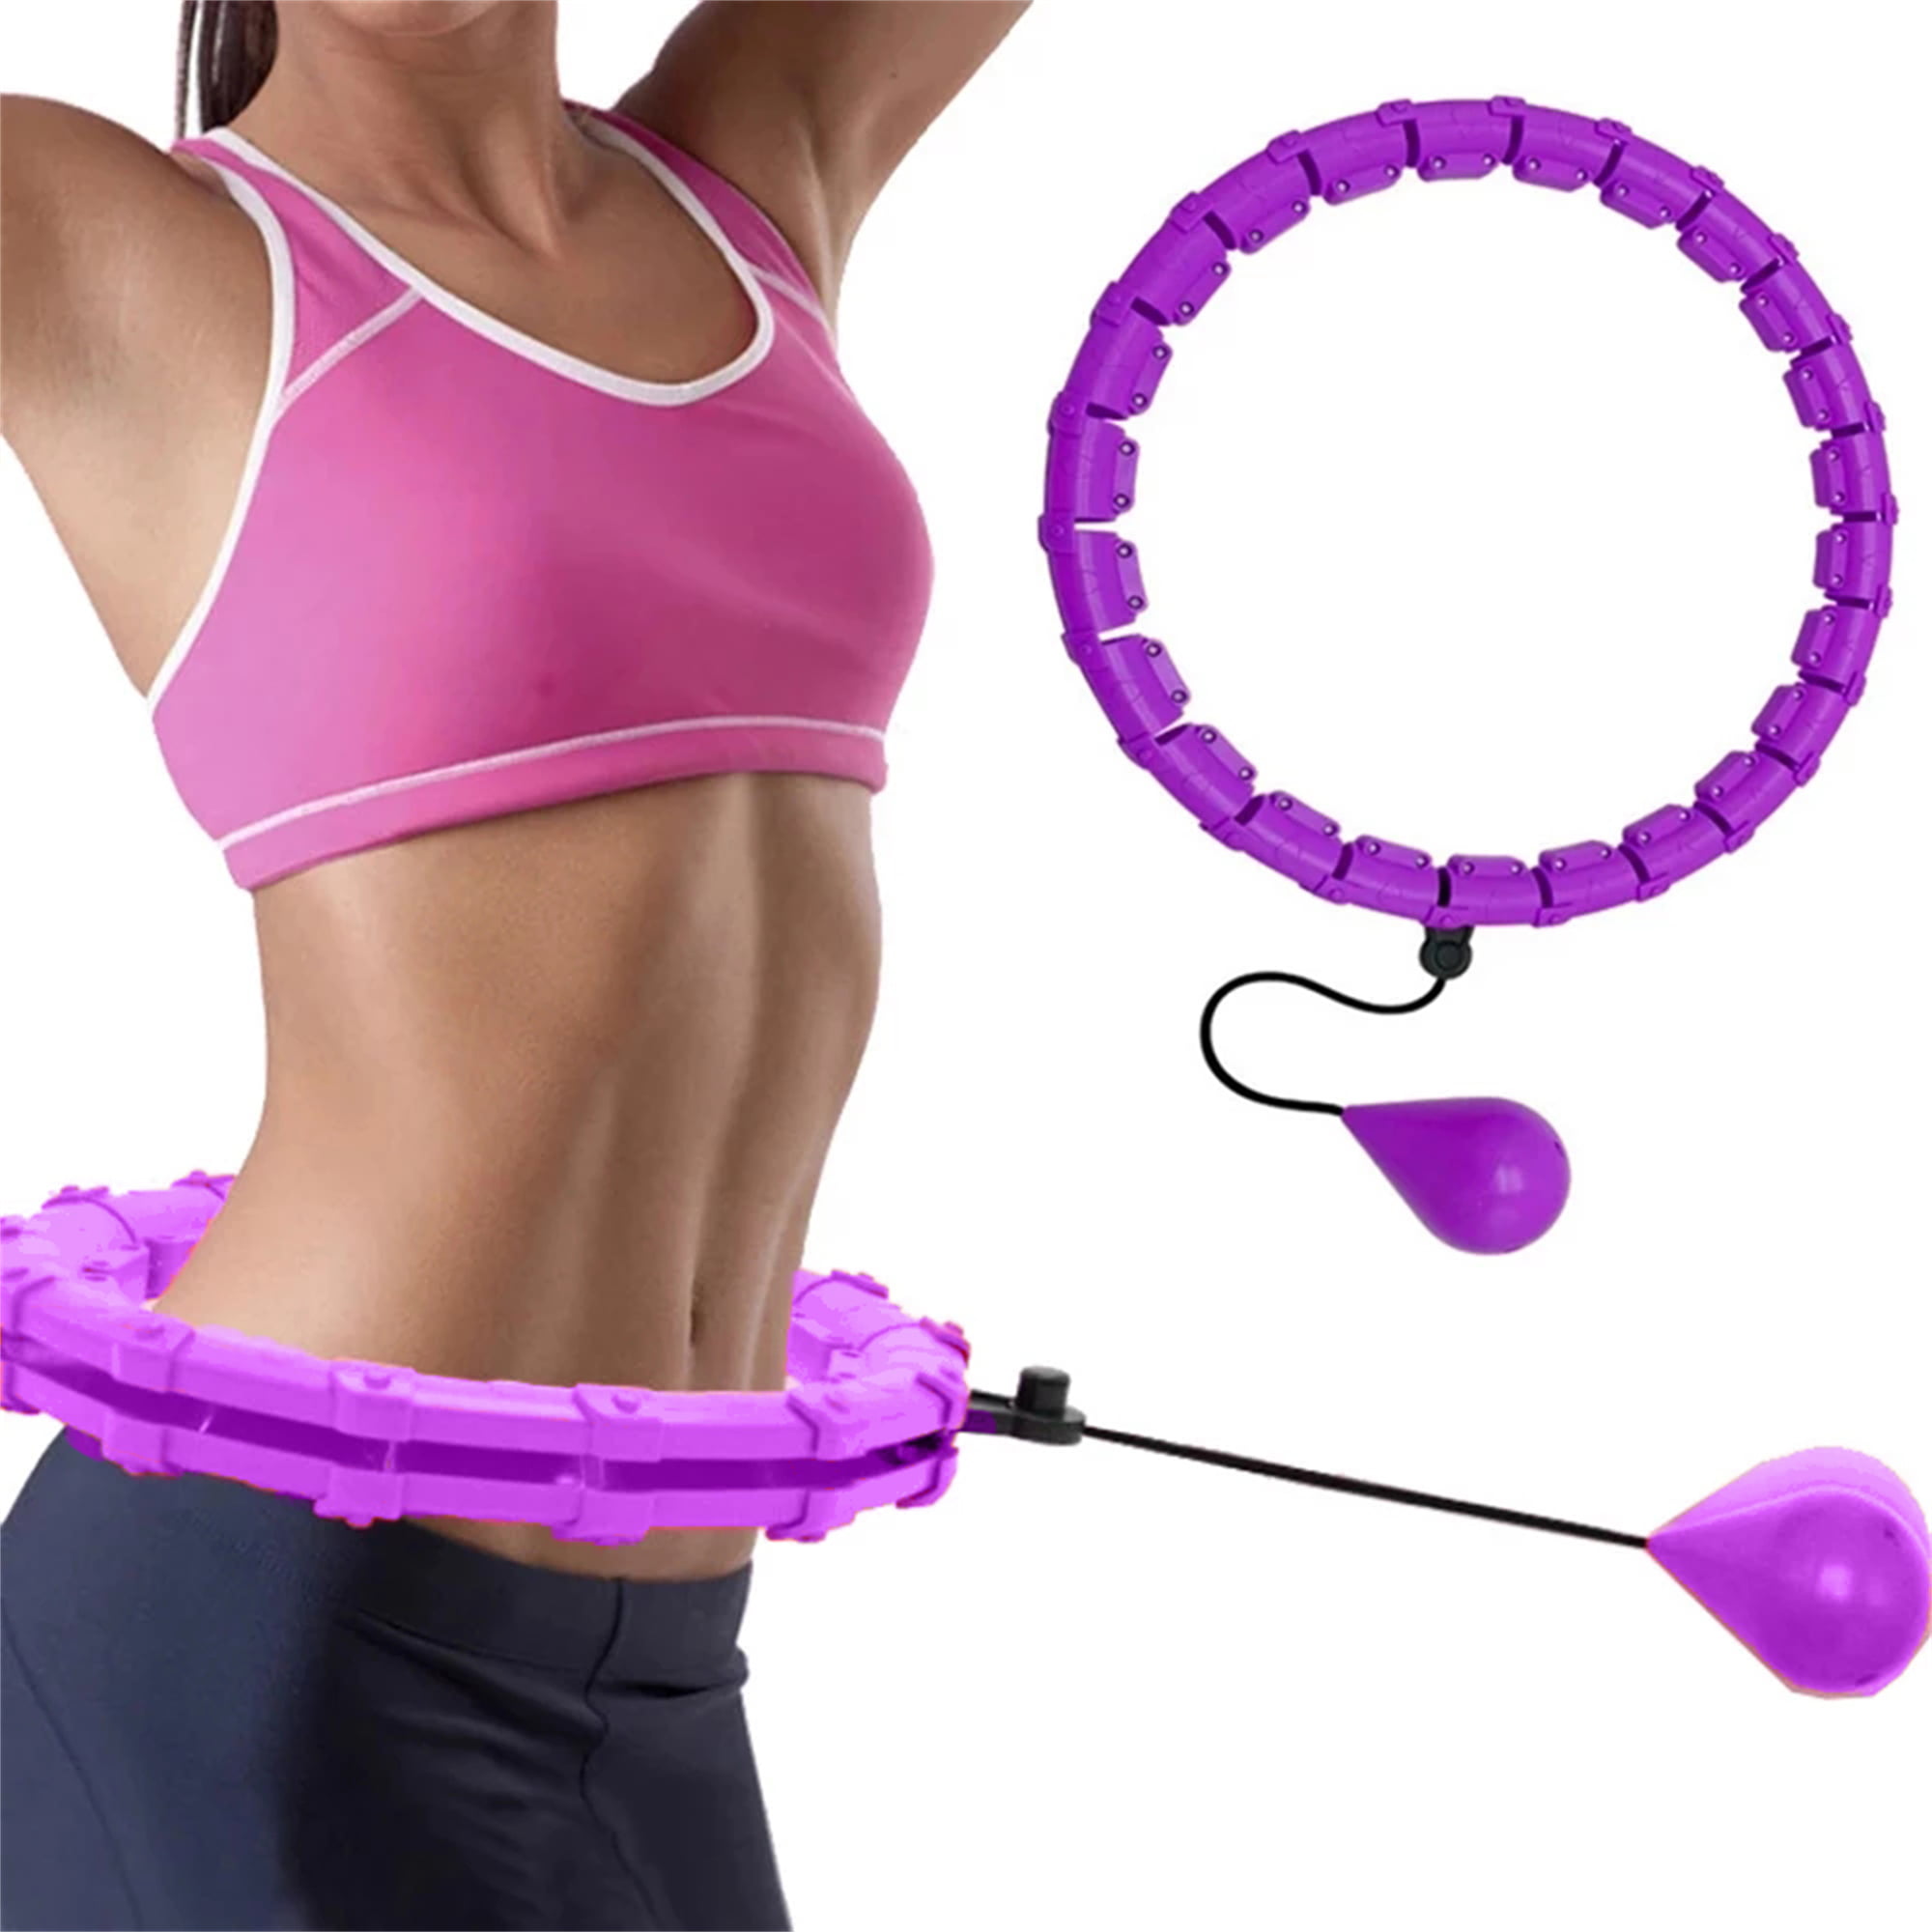 Home Exercise has The Effects of Thin Waist 24 Adjustable Hula Hoops Smart Hula Hoop Suitable for Adults and Children and Weight Loss. 360-degree Massage Gravity Ball Hula Hoop 